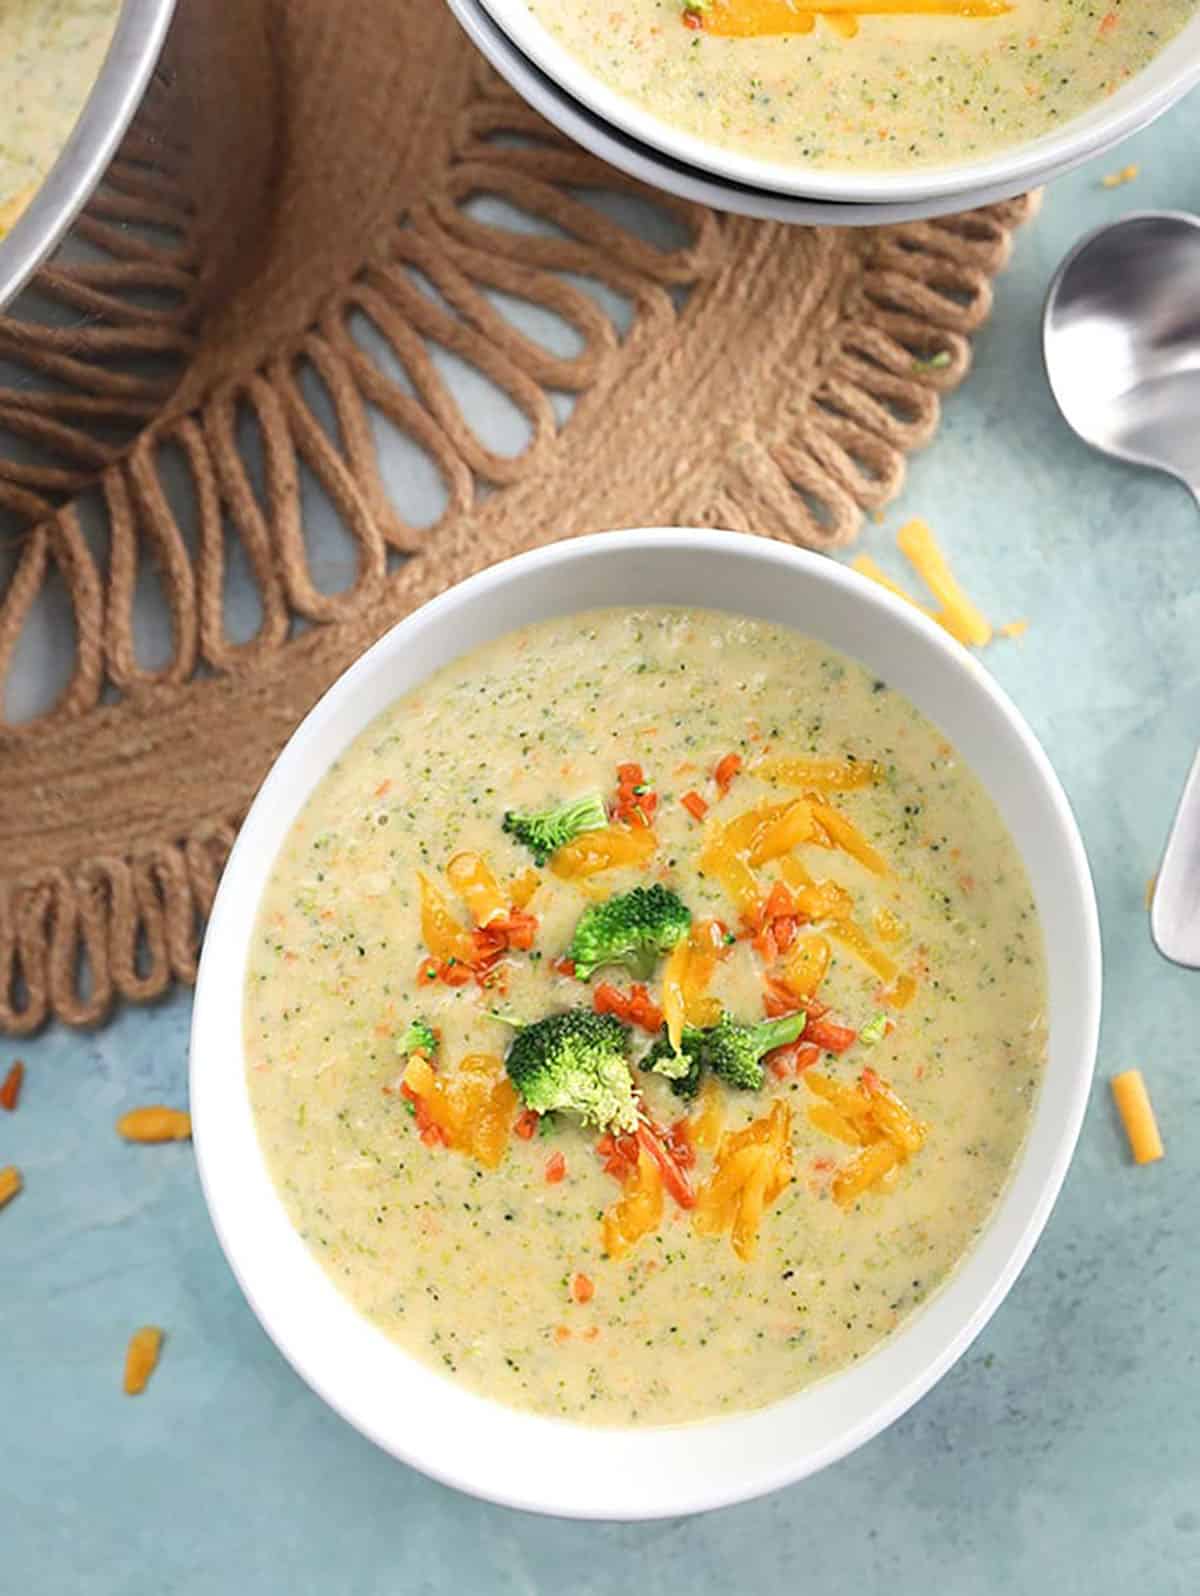 Broccoli Cheddar soup in a white bowl with a spoon on a blue background.